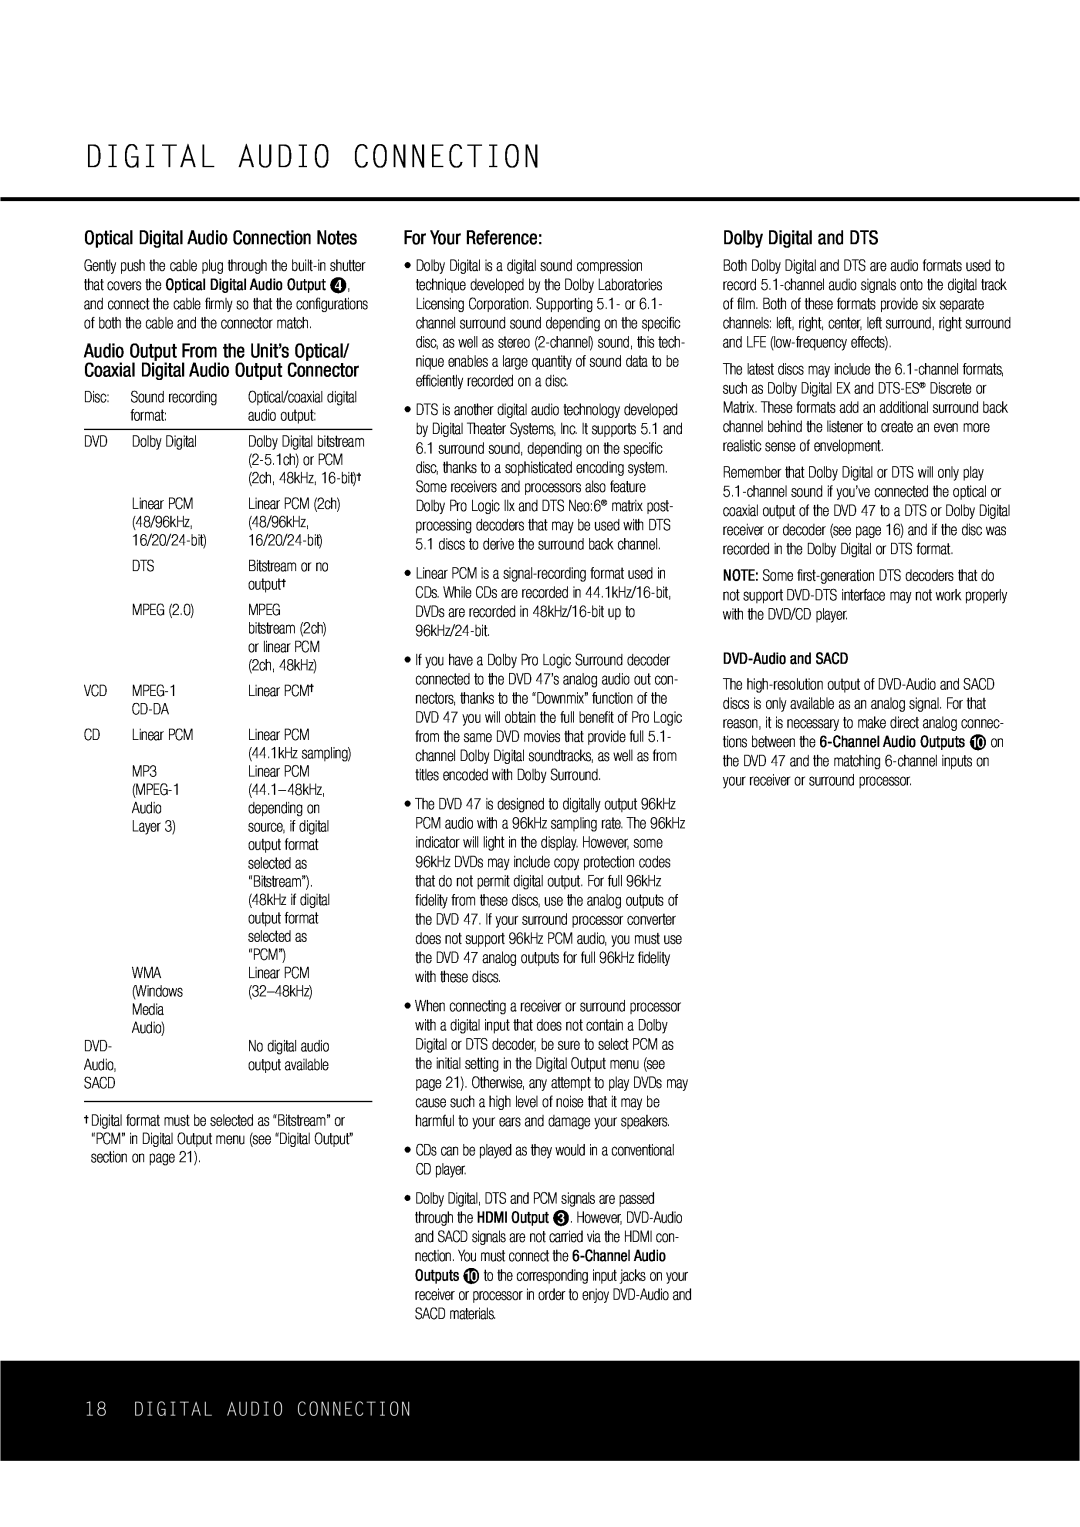 Harman-Kardon DVD47 owner manual Digital Audio Connection, For Your Reference, Dolby Digital and DTS 